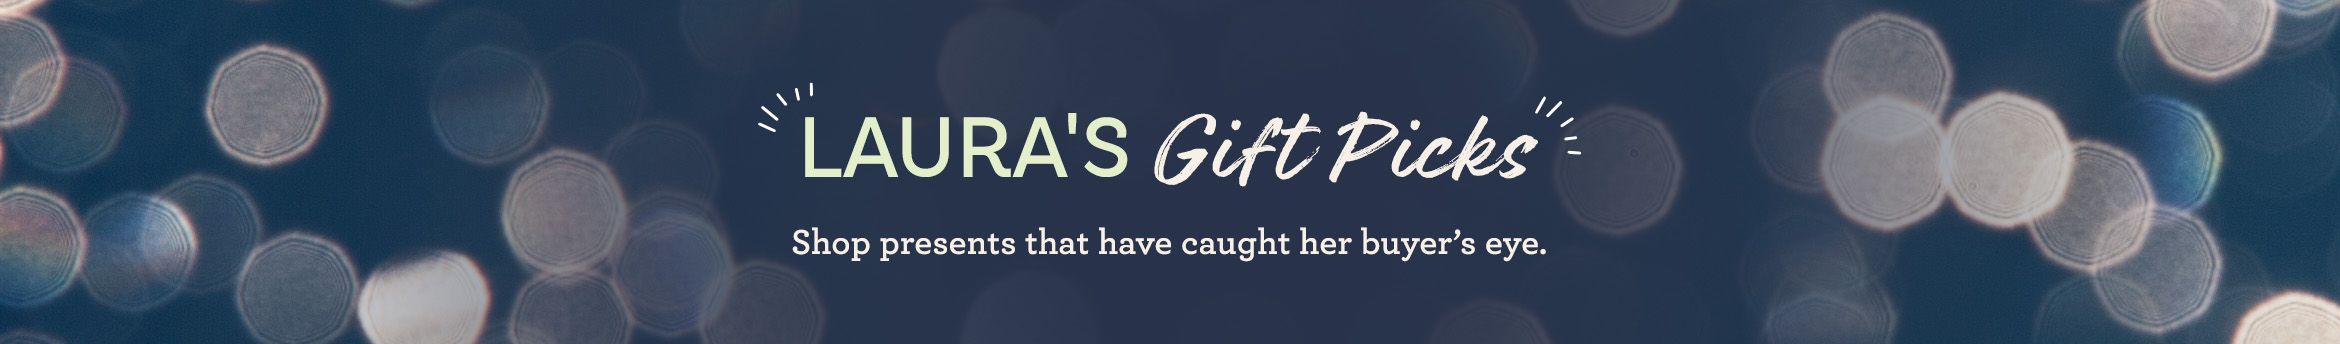 Laura's Gift Picks Shop presents that have caught her buyer's eye.